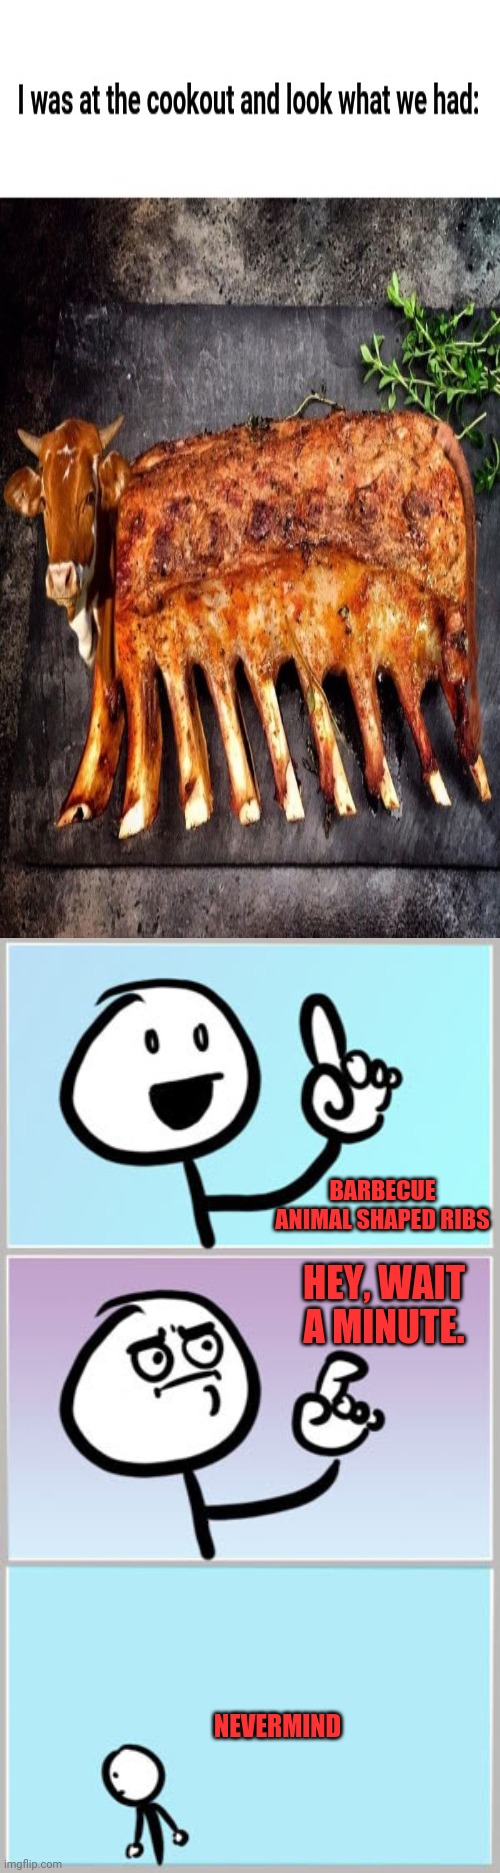 Barbecue animal shaped ribs | BARBECUE ANIMAL SHAPED RIBS; HEY, WAIT A MINUTE. NEVERMIND | image tagged in well nevermind,barbecue,ribs,funny,memes,animals | made w/ Imgflip meme maker